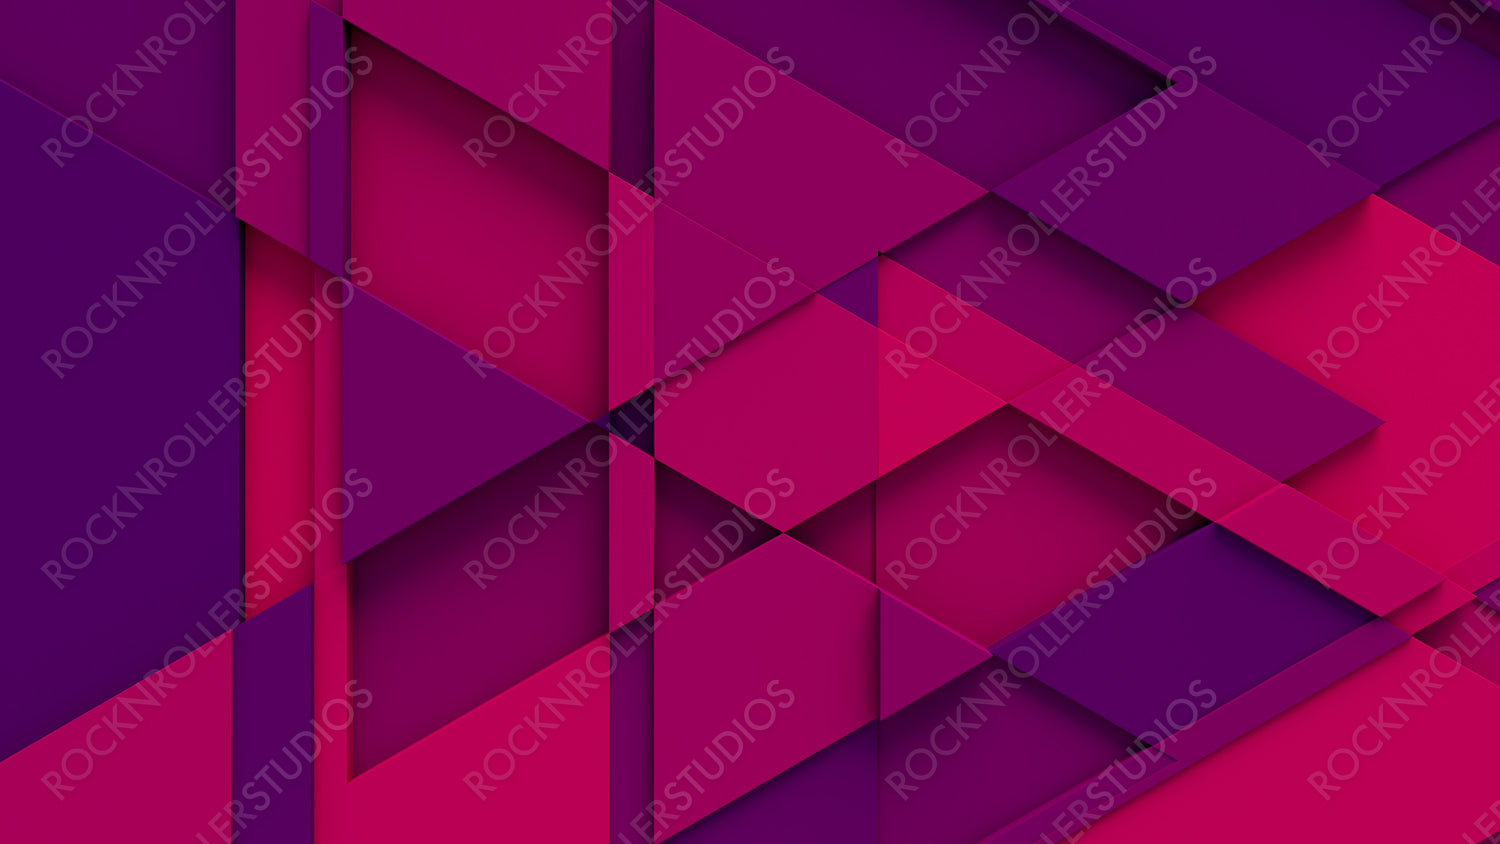 Multicolored tech background, with a geometric 3D structure. Clean, vibrant design with simple, bright, modern forms. 3D render